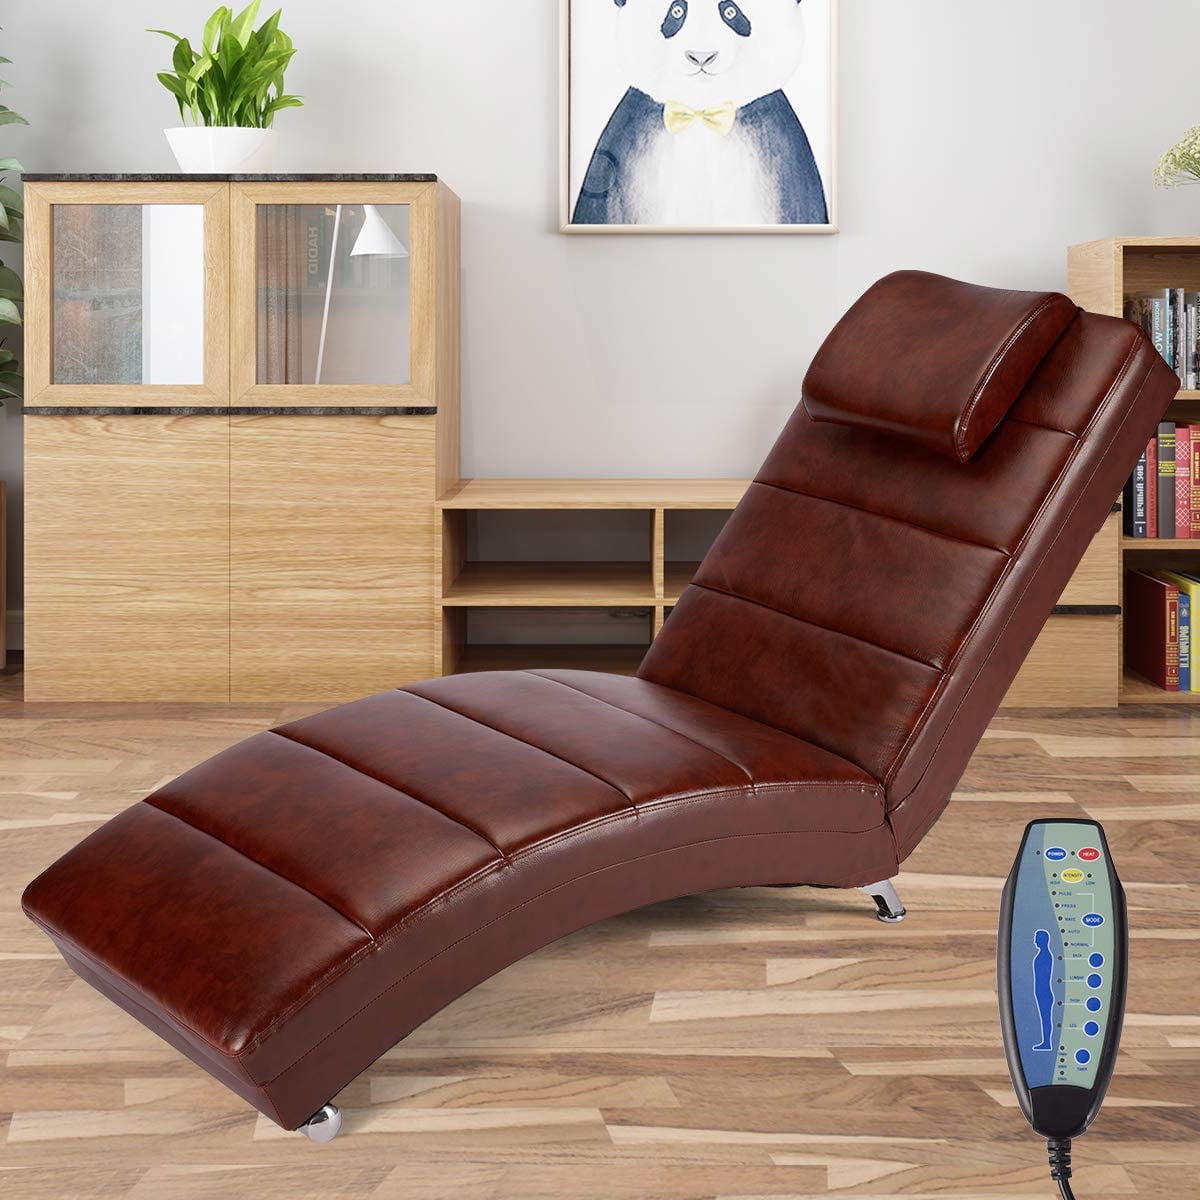 EROMMY Synthetic Leather Chaise Longue with Massage Function,Massage